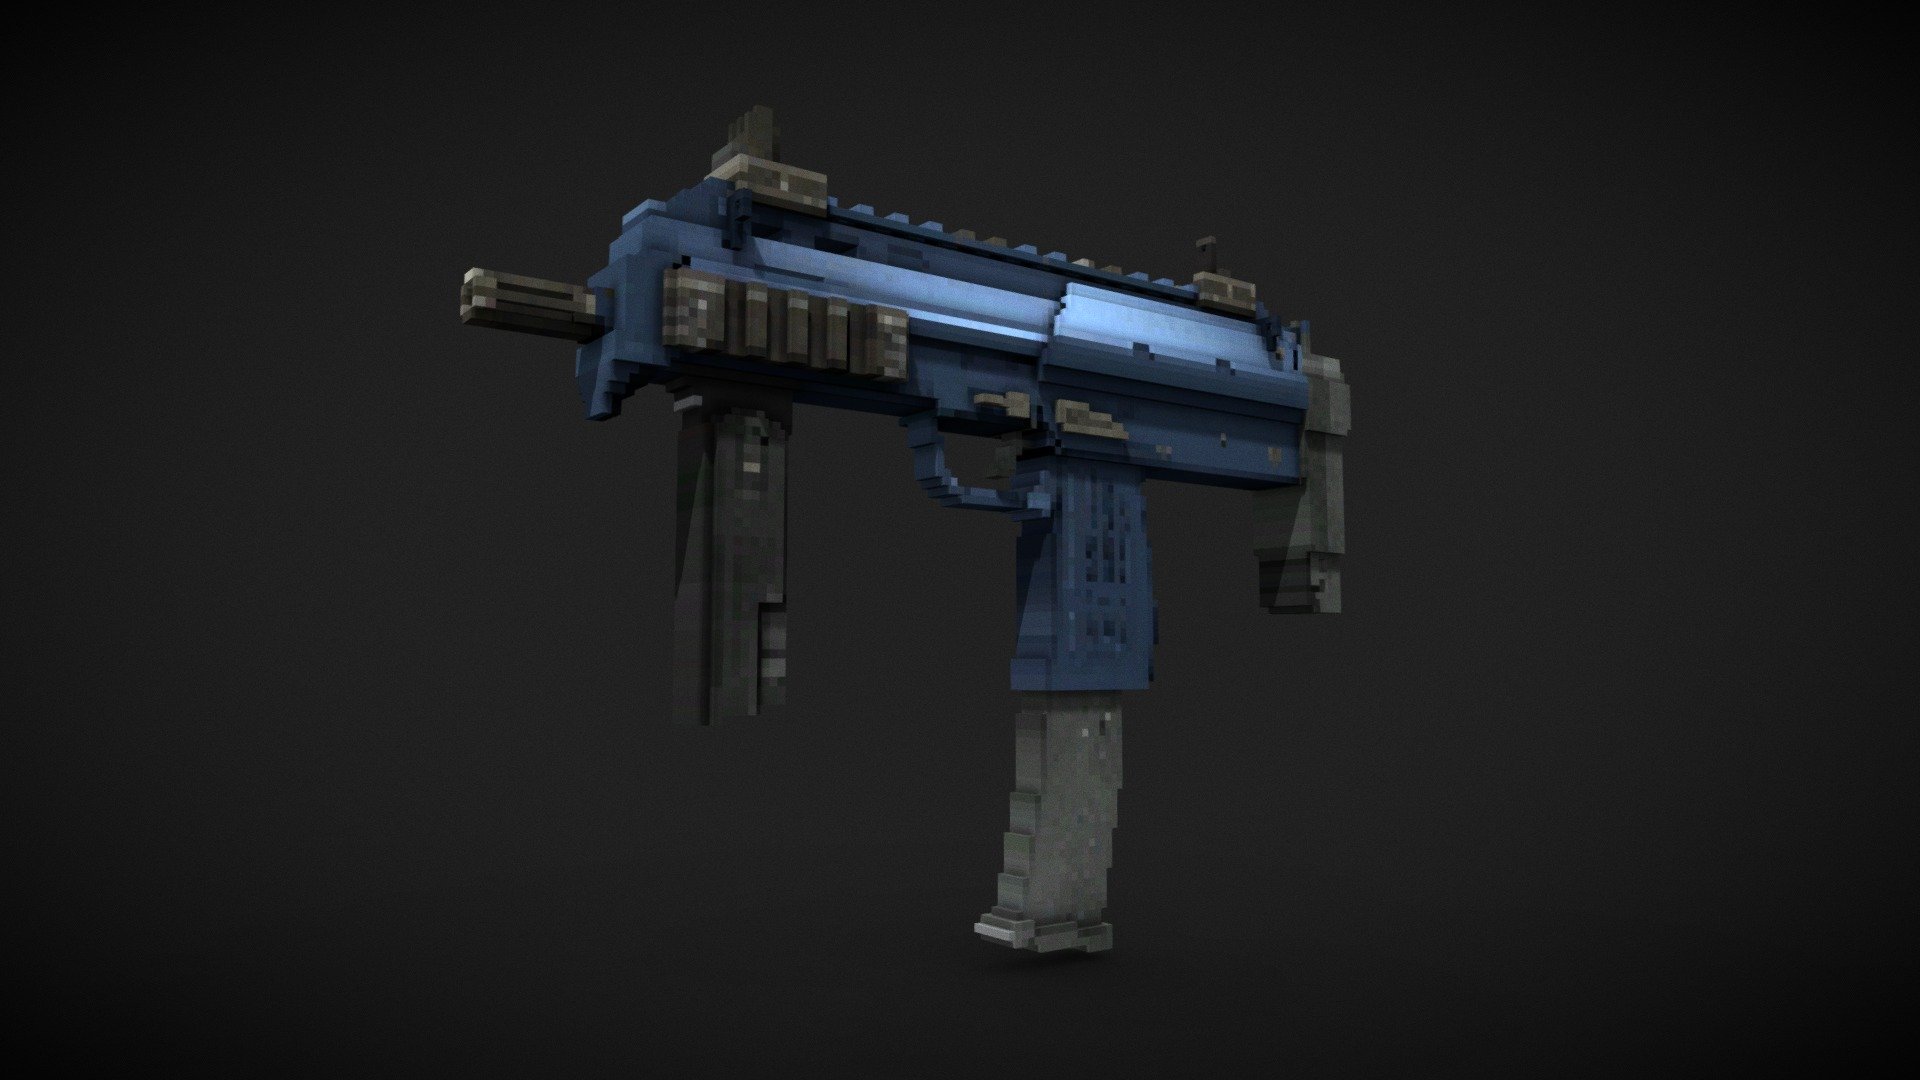 This is a voxel art version of the MP7 Anodized Navy for my minecraft server, original version can be found here: https://csgostash.com/skin/163/MP7-Anodized-Navy

Designed by Duytng with Cubik Studio - https://cubik.studio

Made with Cubik Studio 2.9.481 Beta - MP7 | Anodized Navy - Voxel Art - 3D model by Tung Linh (@tlinhh.41) 3d model